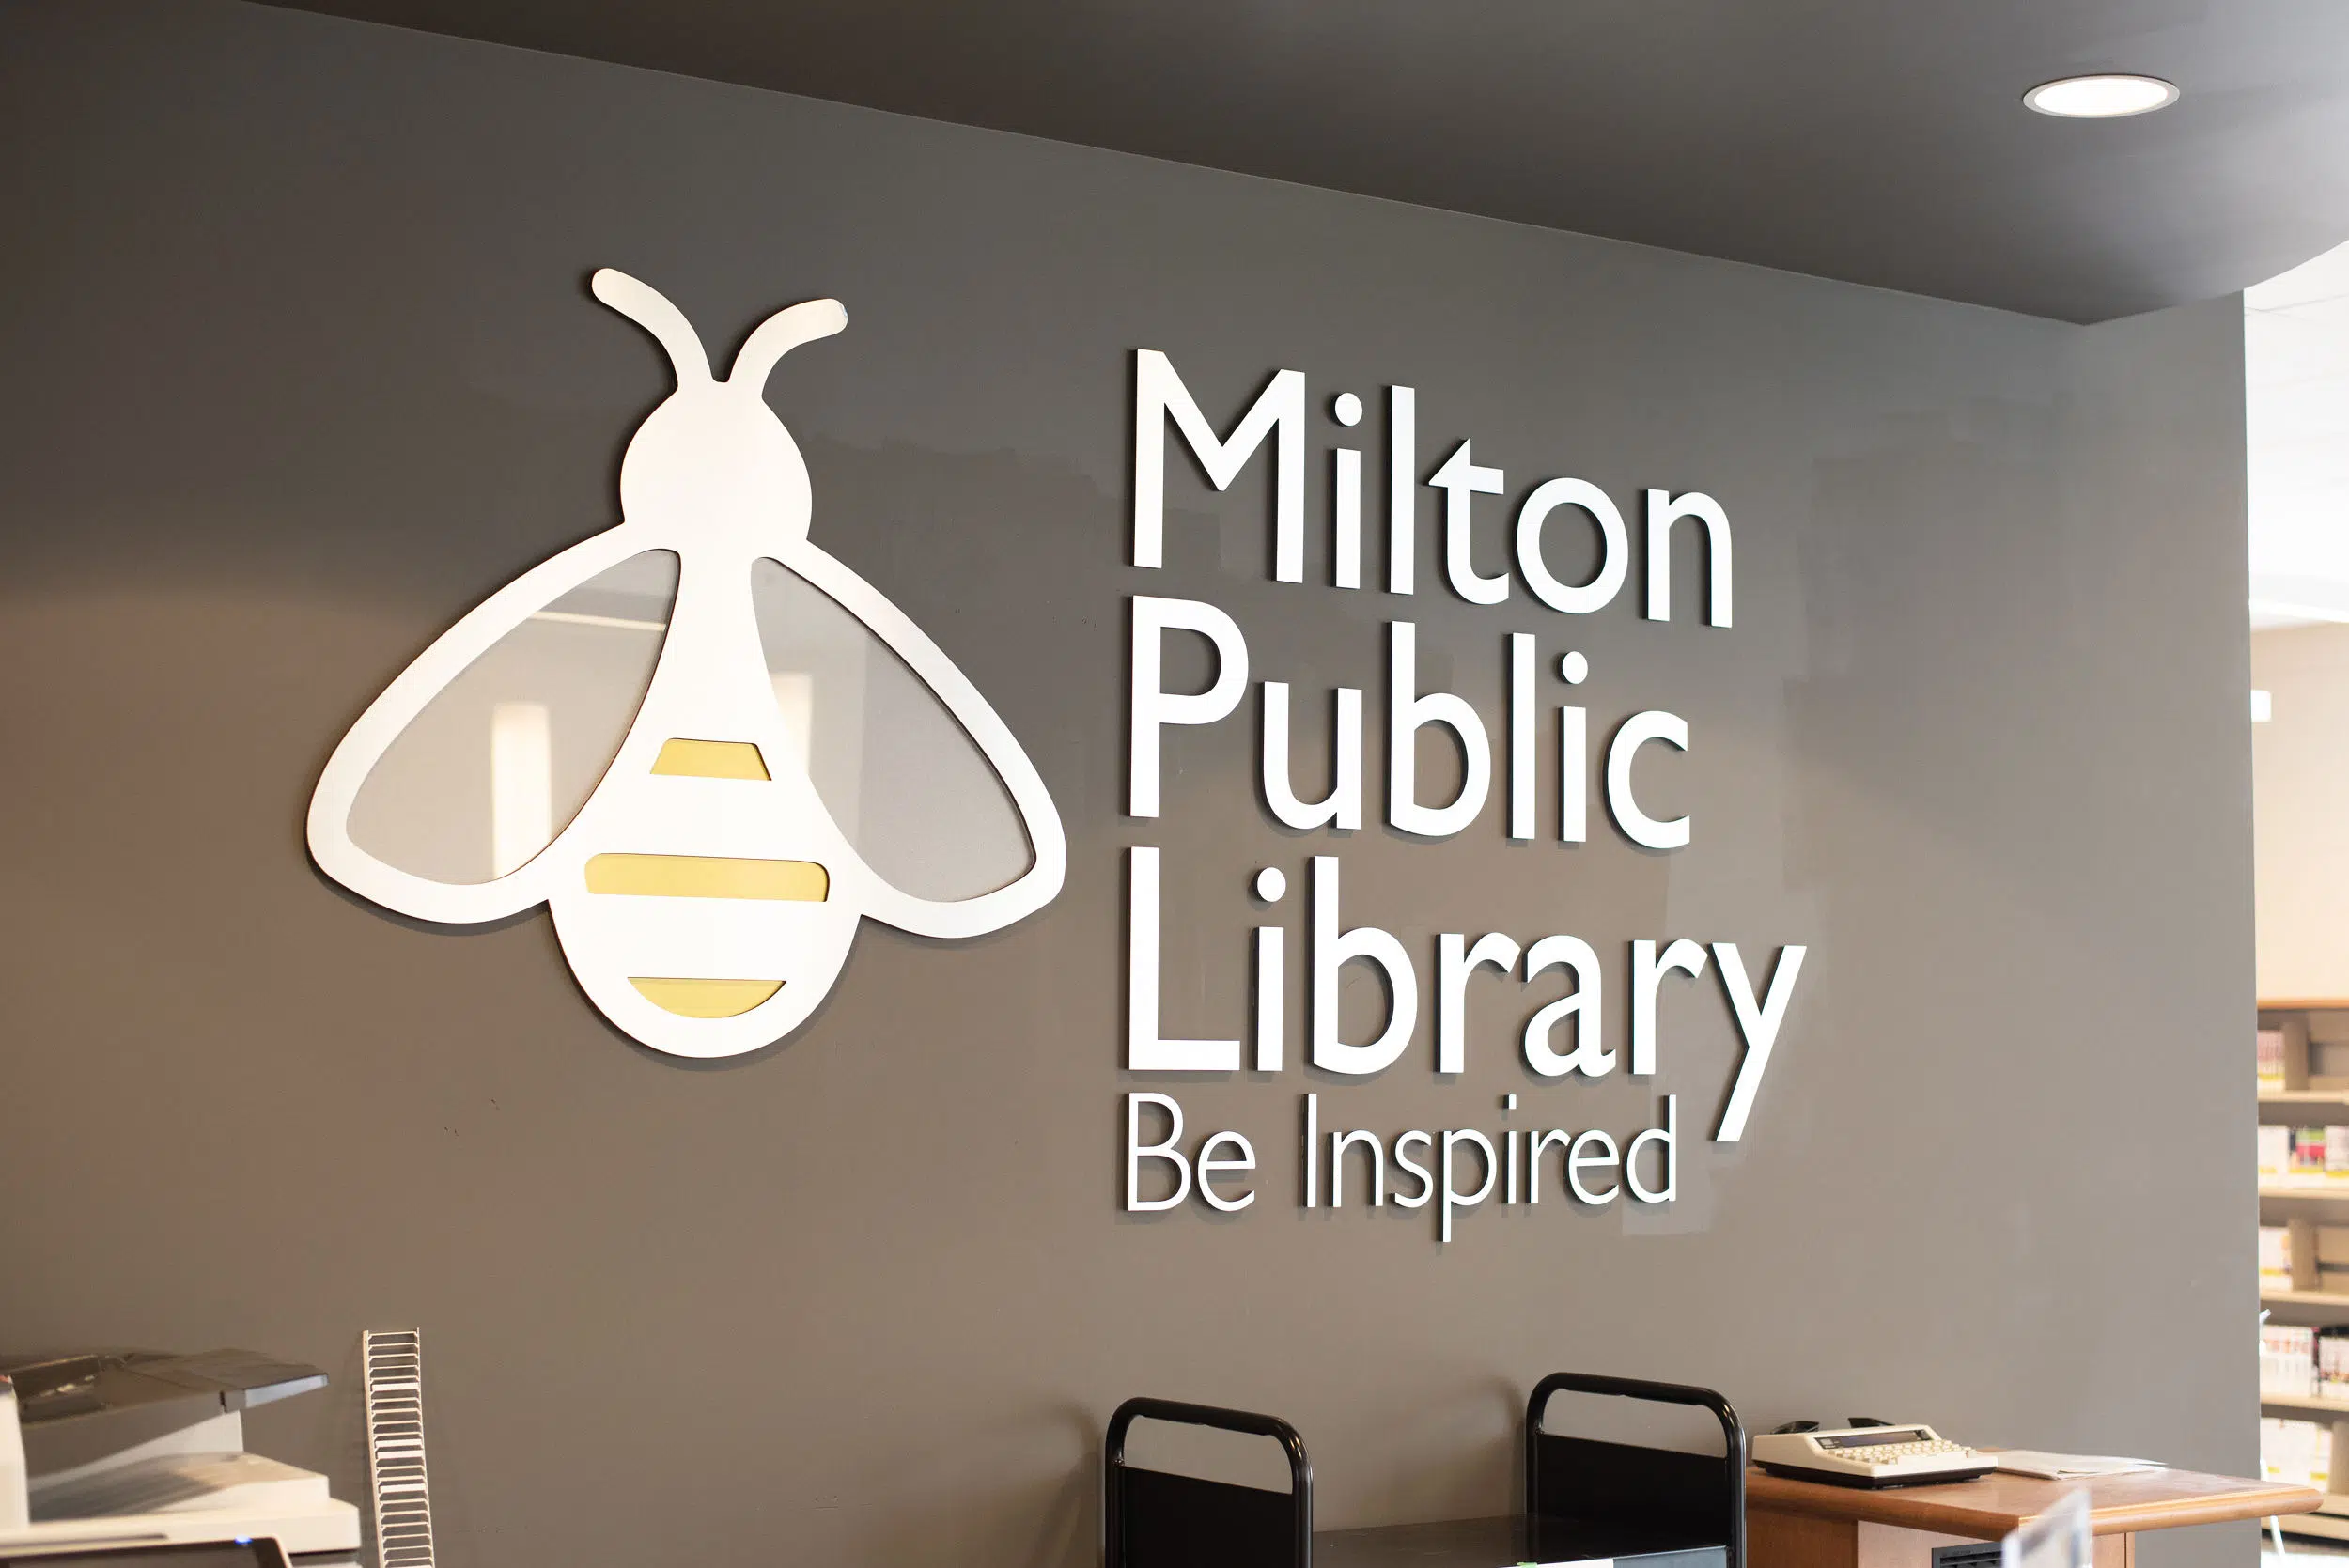 It's now easier than ever to get a library card in Milton